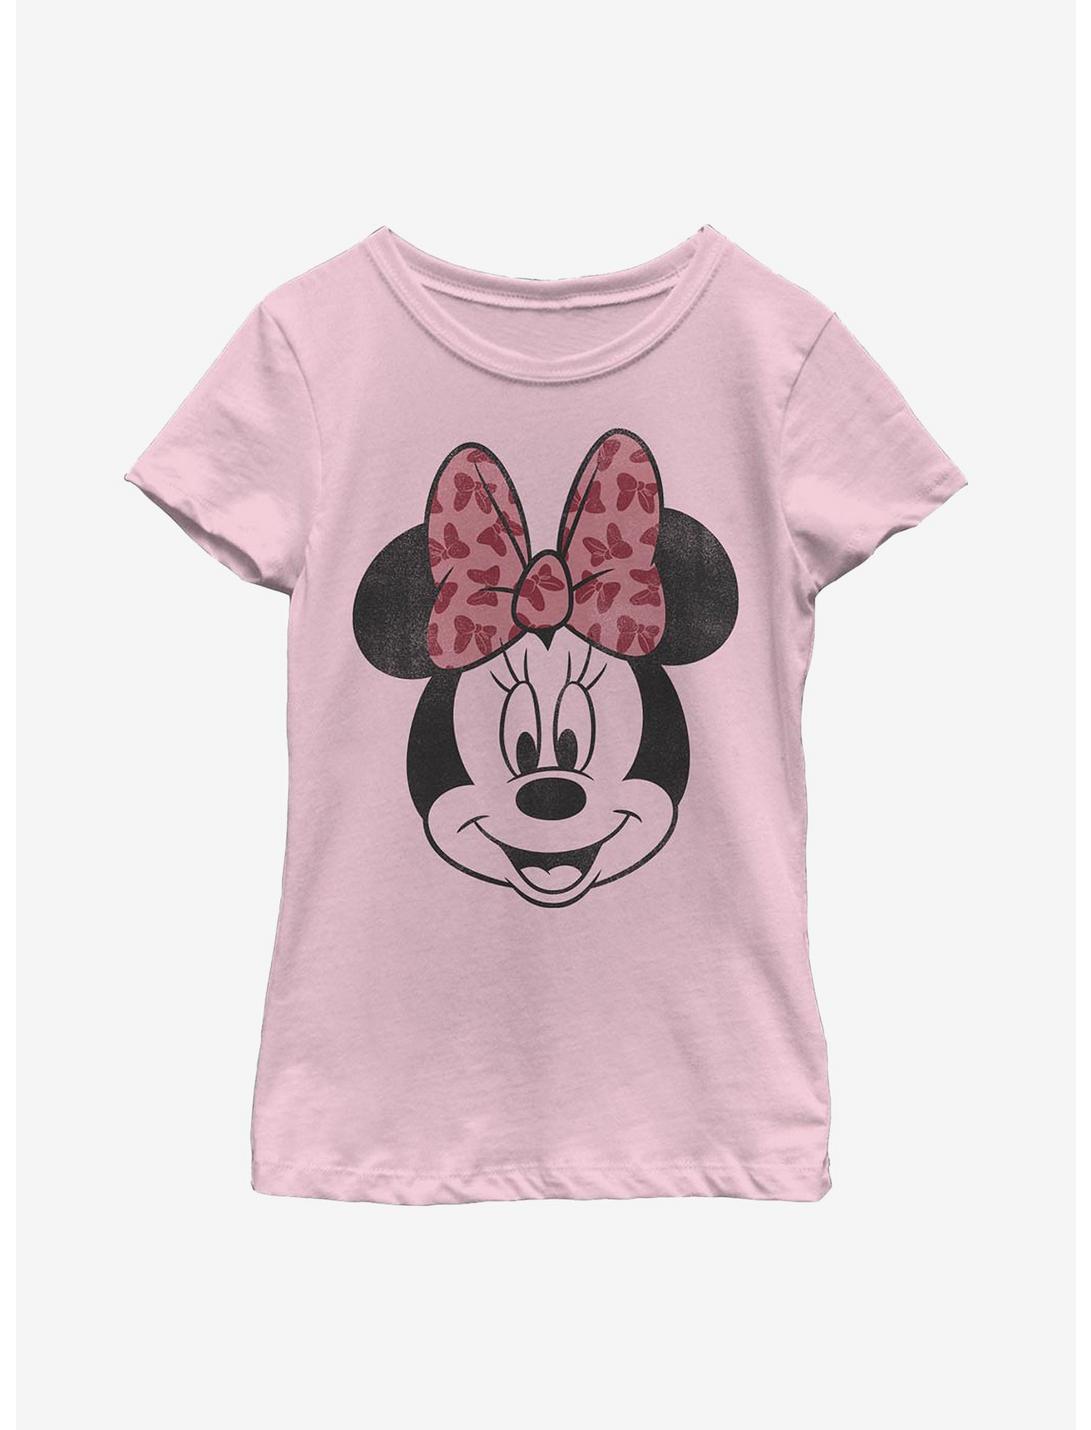 Disney Minnie Mouse Modern Minnie Face Youth Girls T-Shirt, PINK, hi-res